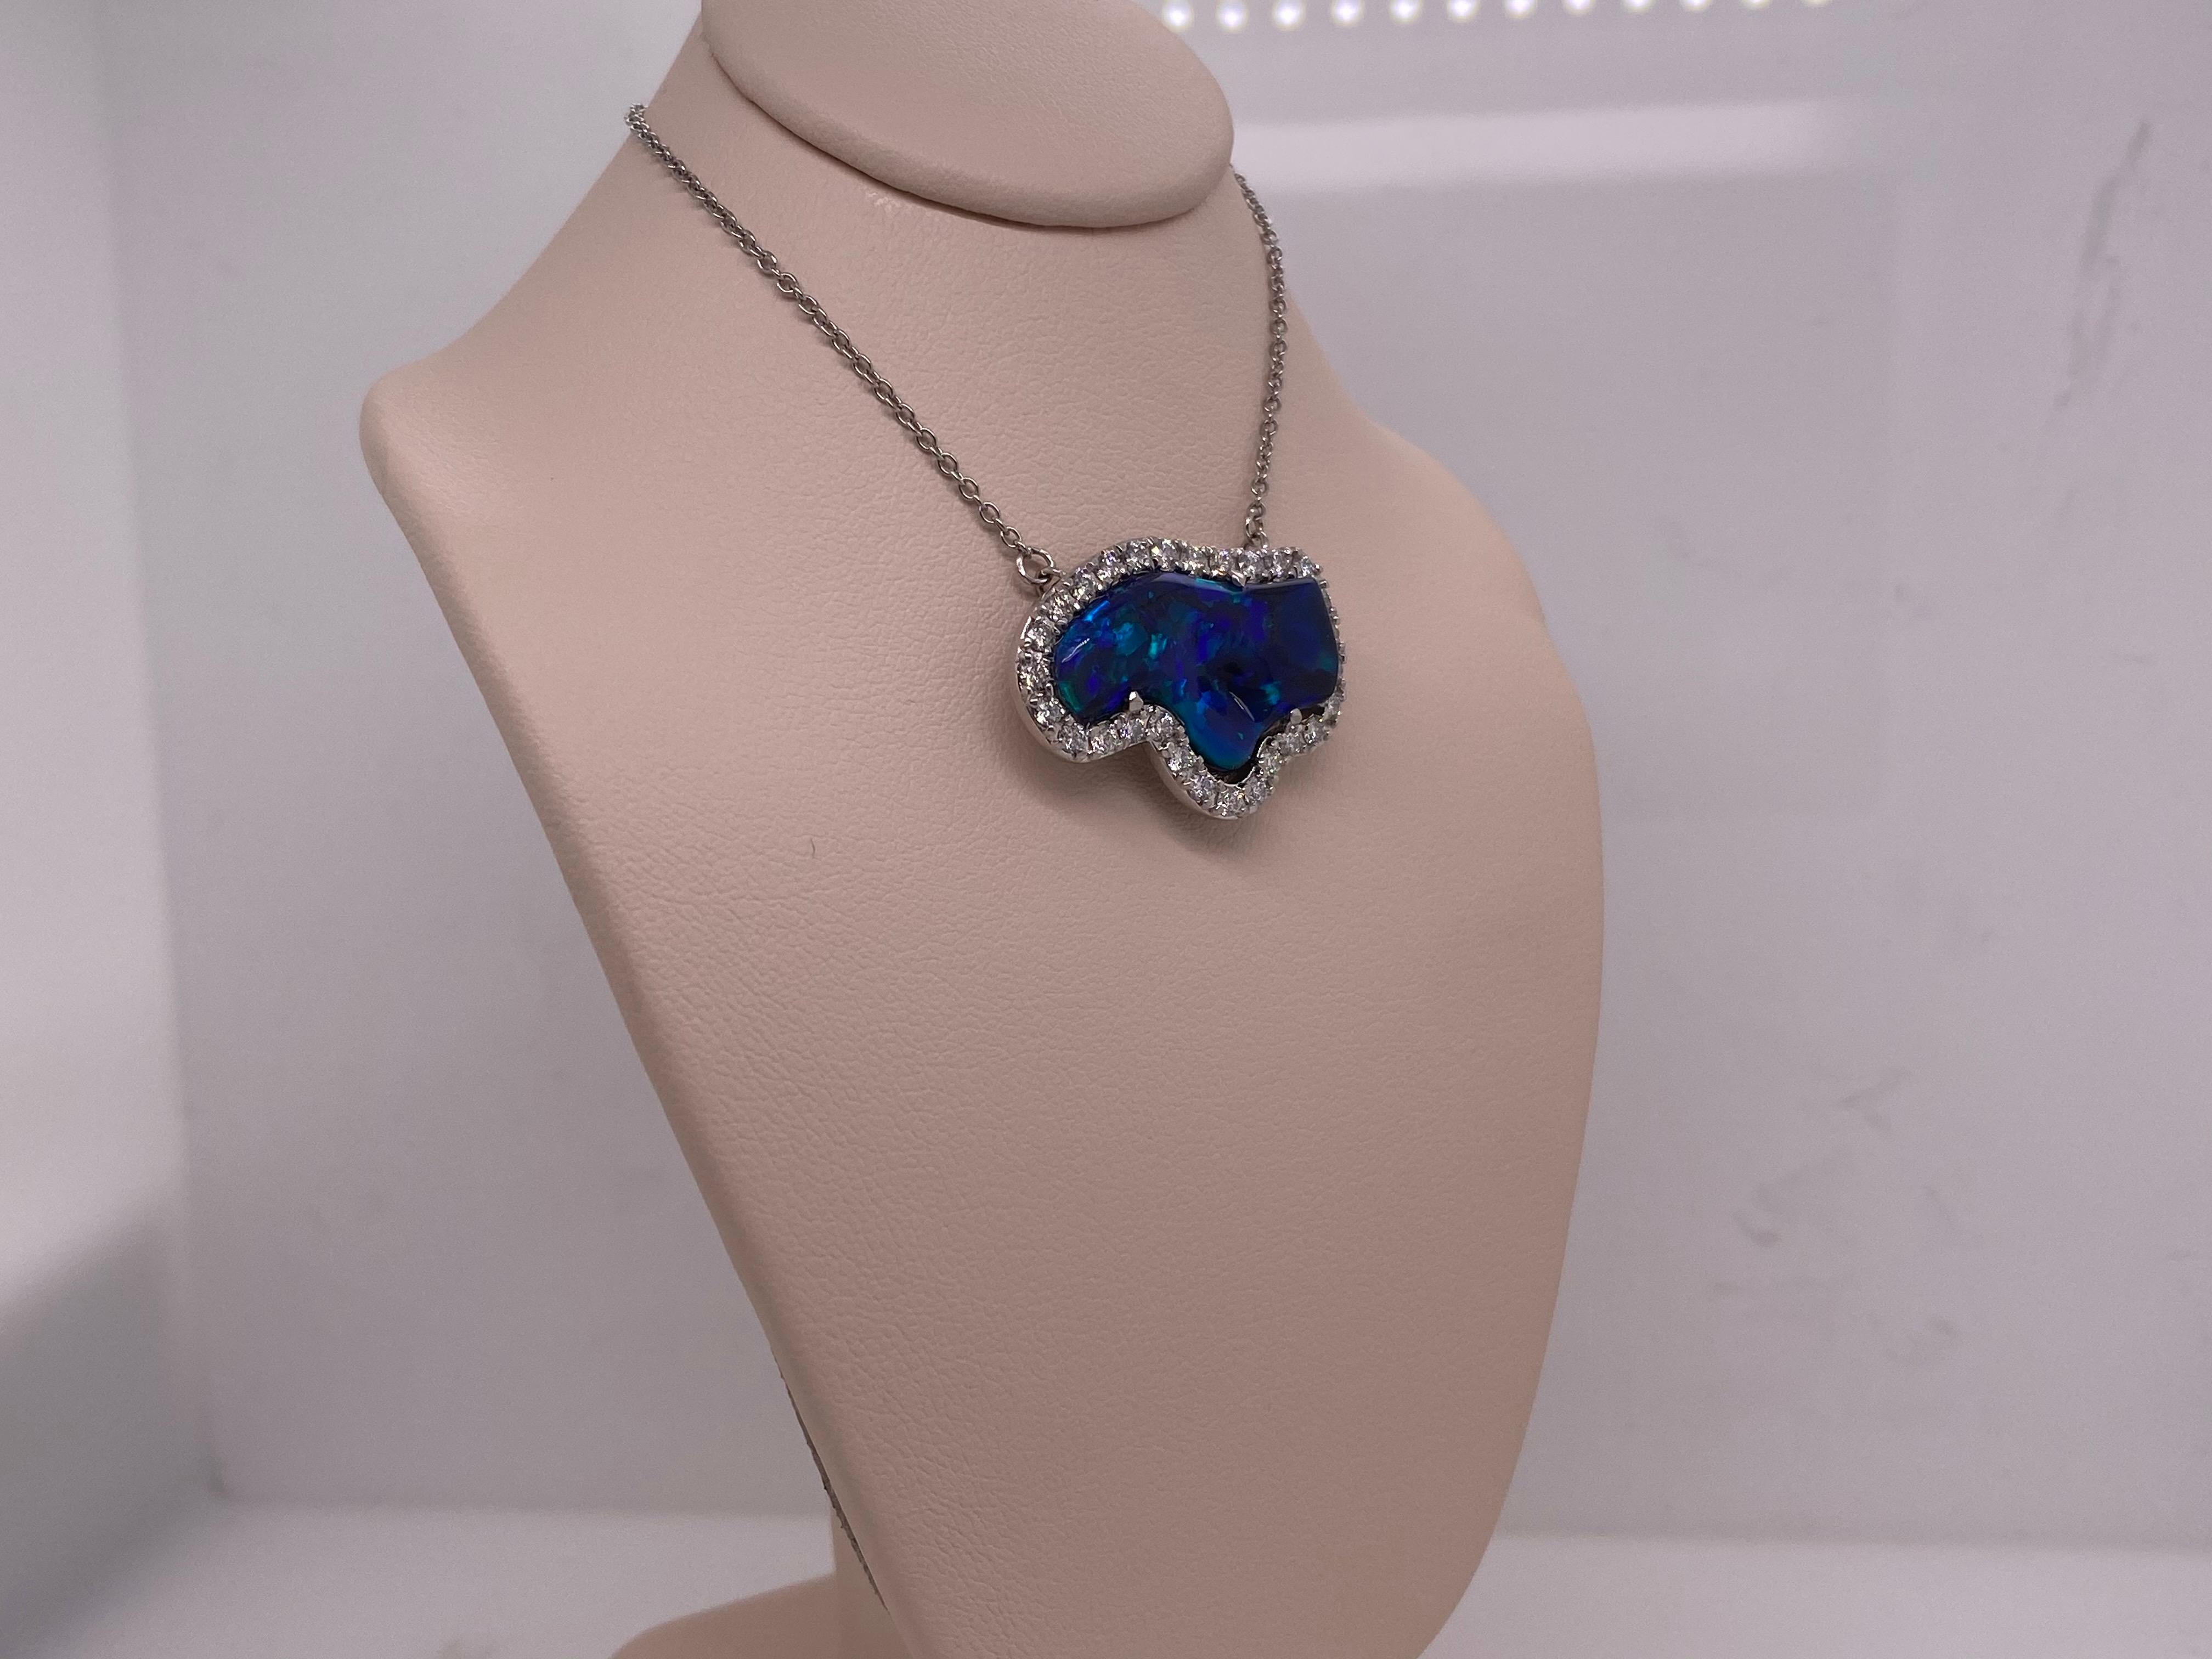 5.15 Carat Australian Opal in 1.00 Carat Round Diamond Halo in Platinum Necklace In New Condition For Sale In Houston, TX